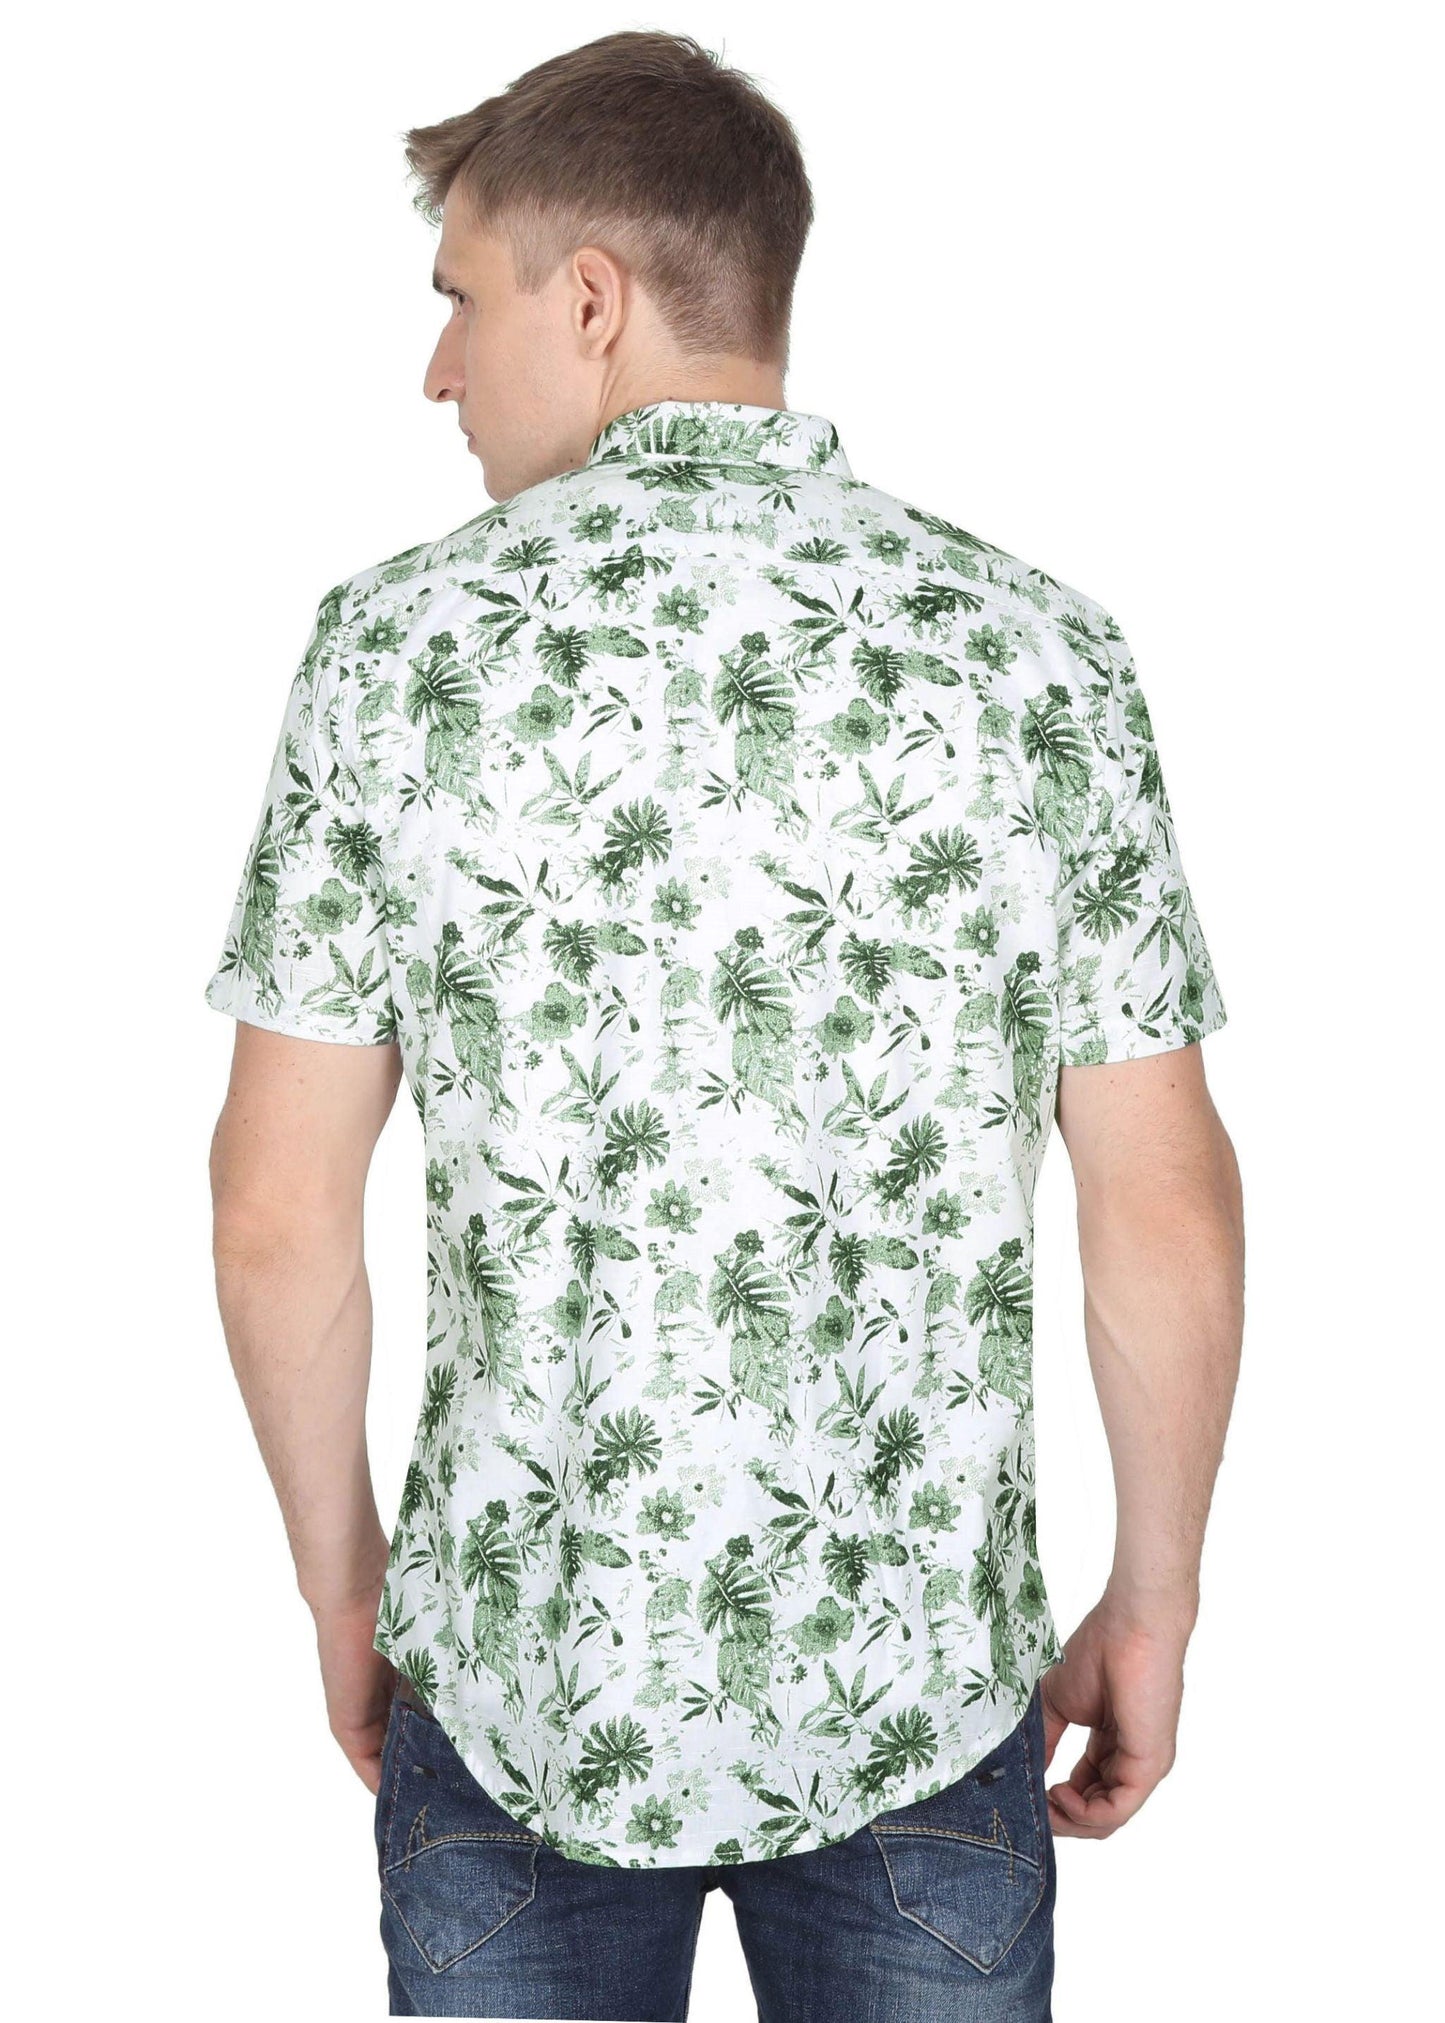 Tusok-orchardFeatured Shirt, Vacation-Printed Shirtimage-Green Linen (4)